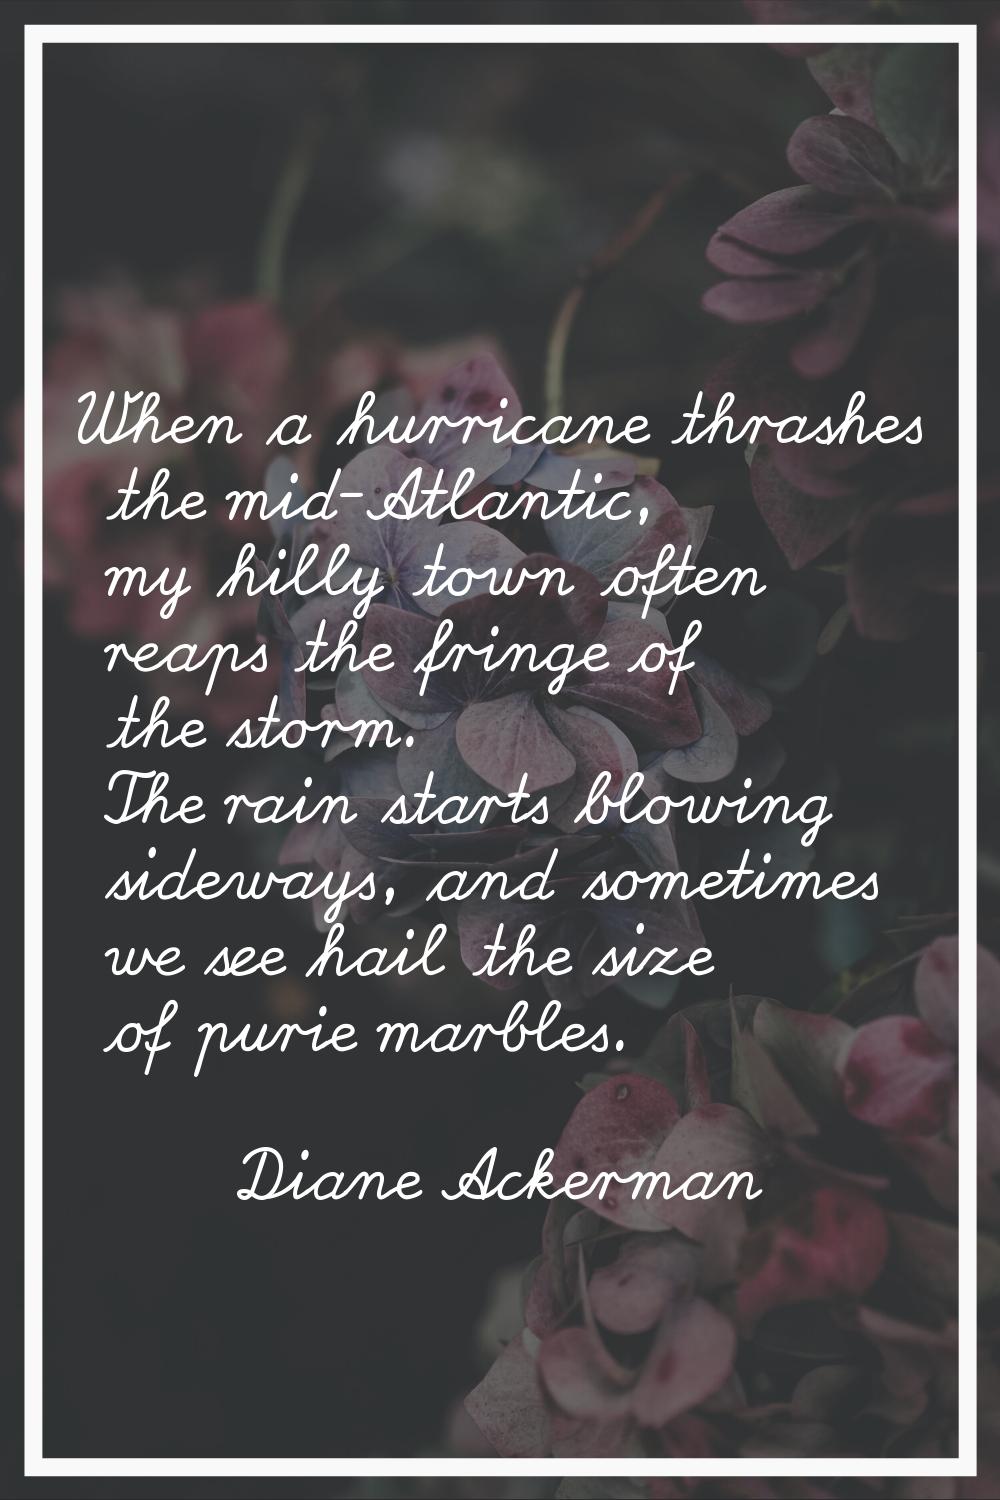 When a hurricane thrashes the mid-Atlantic, my hilly town often reaps the fringe of the storm. The 